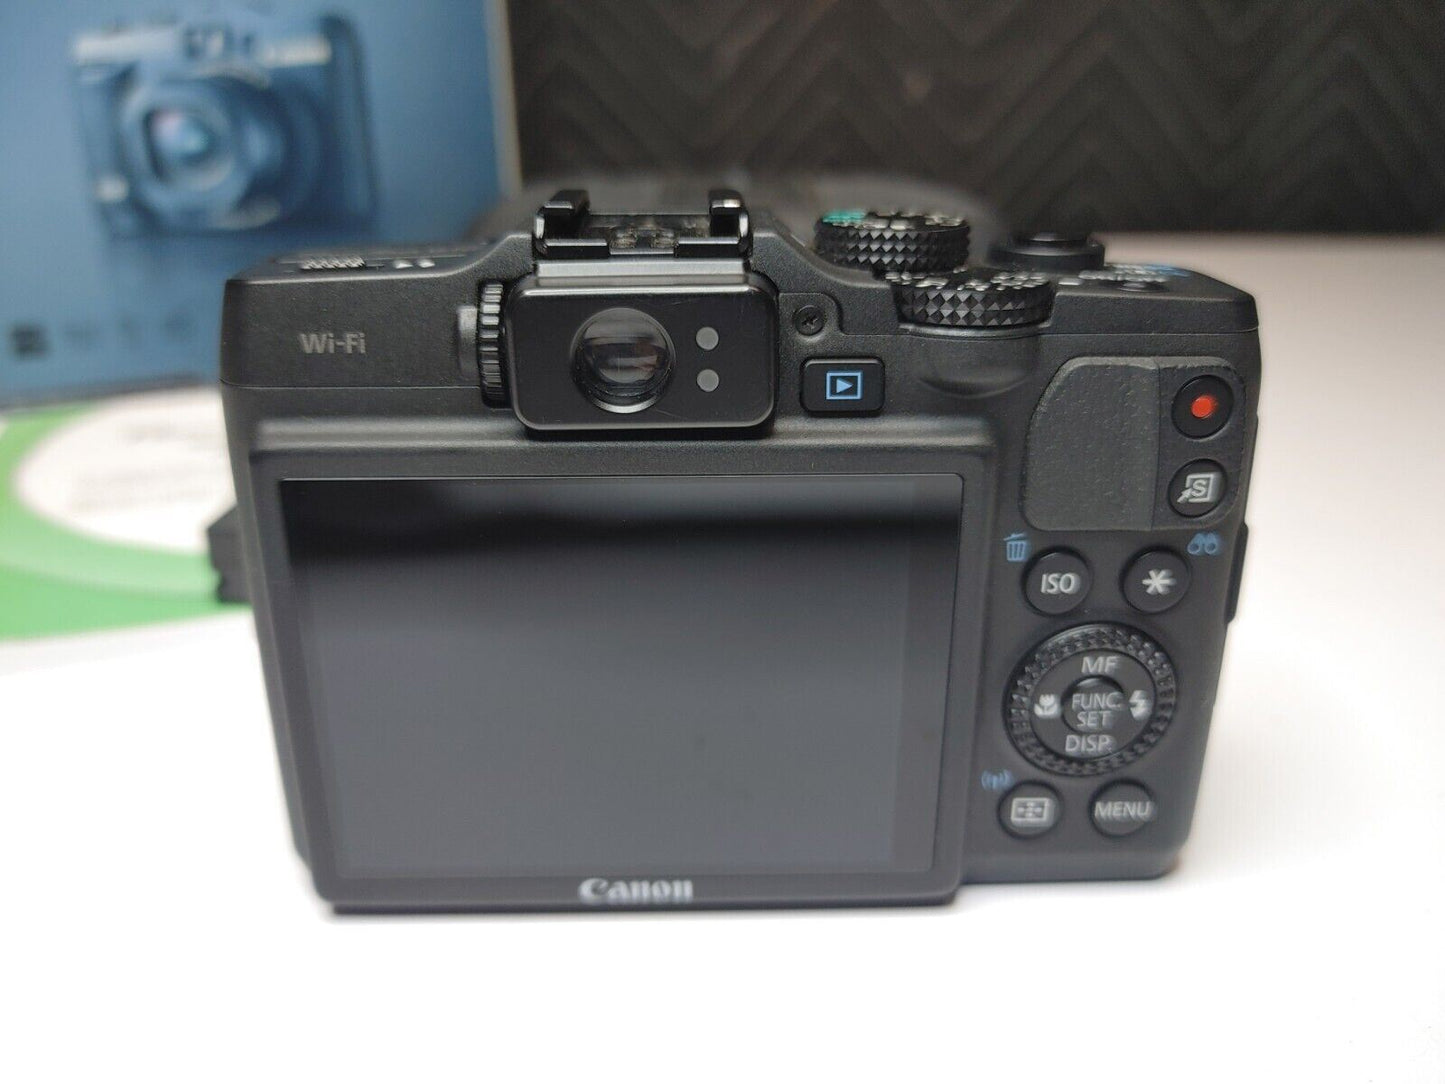 Canon PowerShot G16 Digital Camera with WiFi 12.1MP w/ Box/Charger/Case/Papers